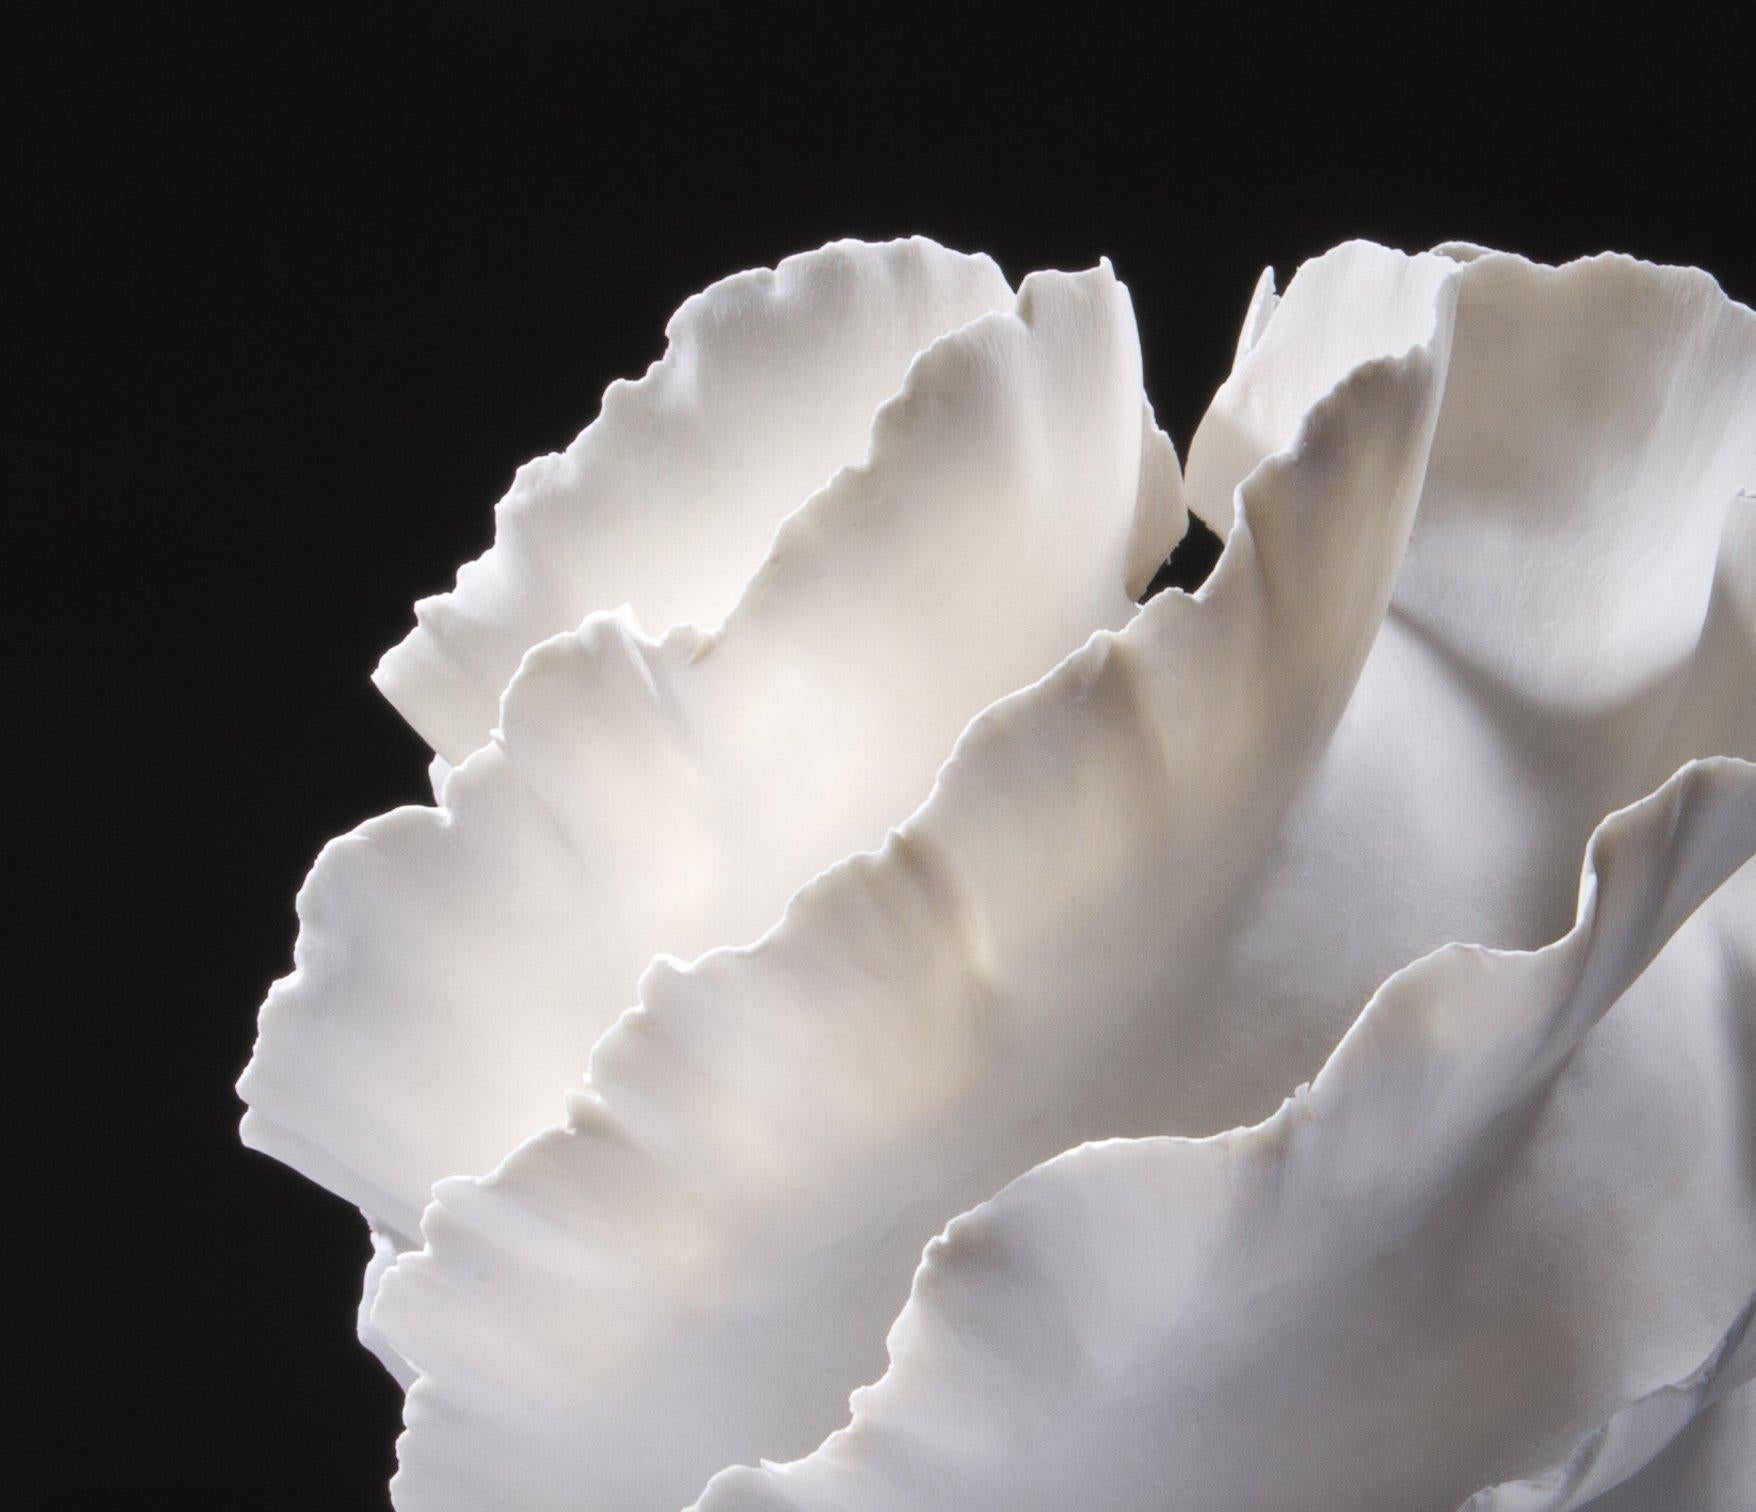 Sculptural Vase II, 2023, (Porcelain, C. 8.6 in. h x 8.2 in. diam., Object No.: 4185)

Davolio’s sophisticated porcelain works and their organic and natural references are influenced by the Art Nouveau style, the keen interest in the mechanics of